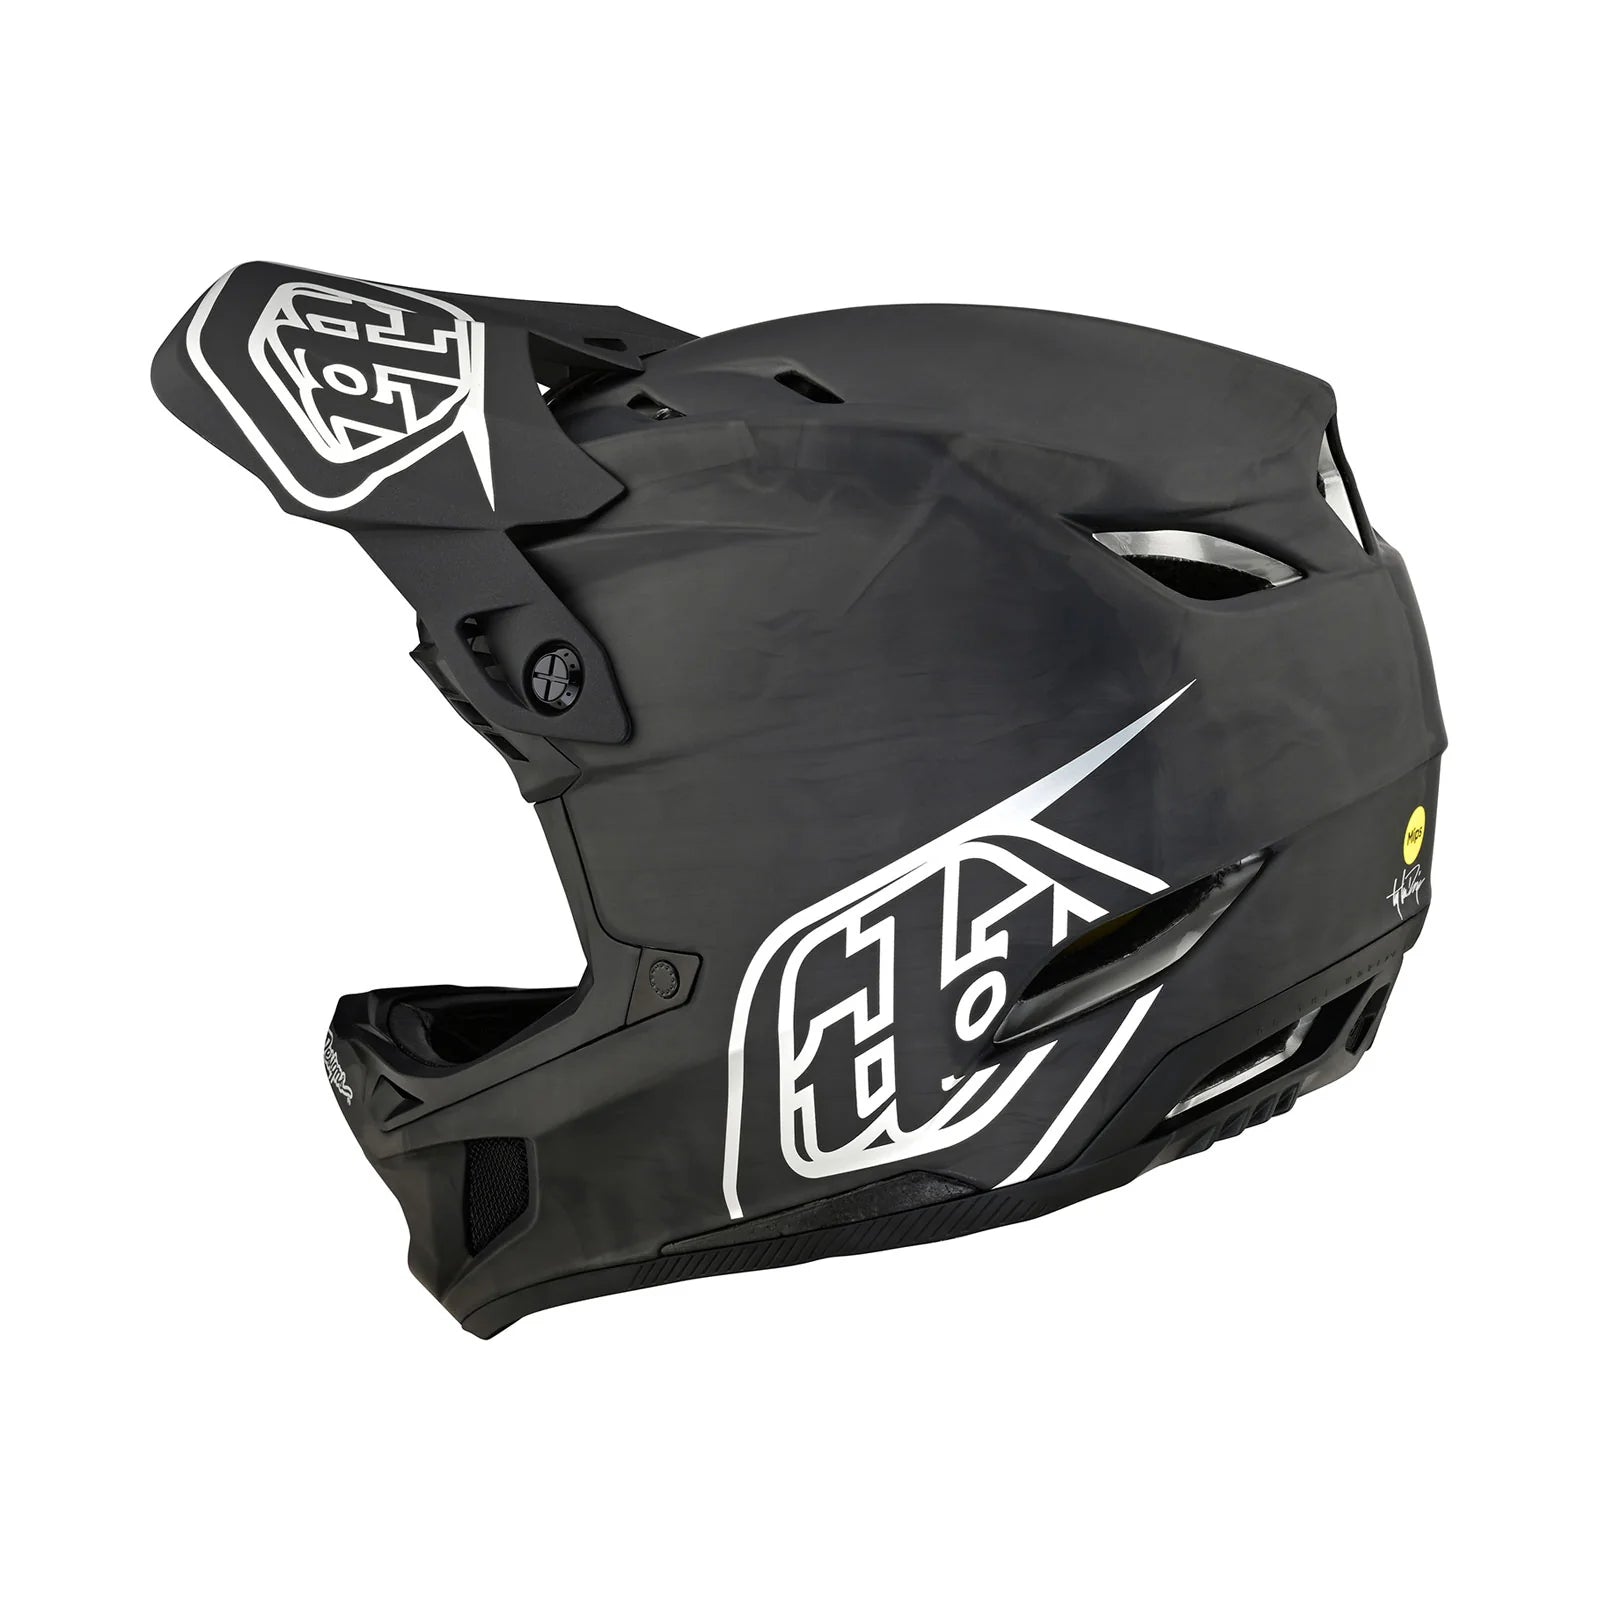 The TLD D4 AS Carbon W/MIPS Helmet Black / Silver is shown on a white background.